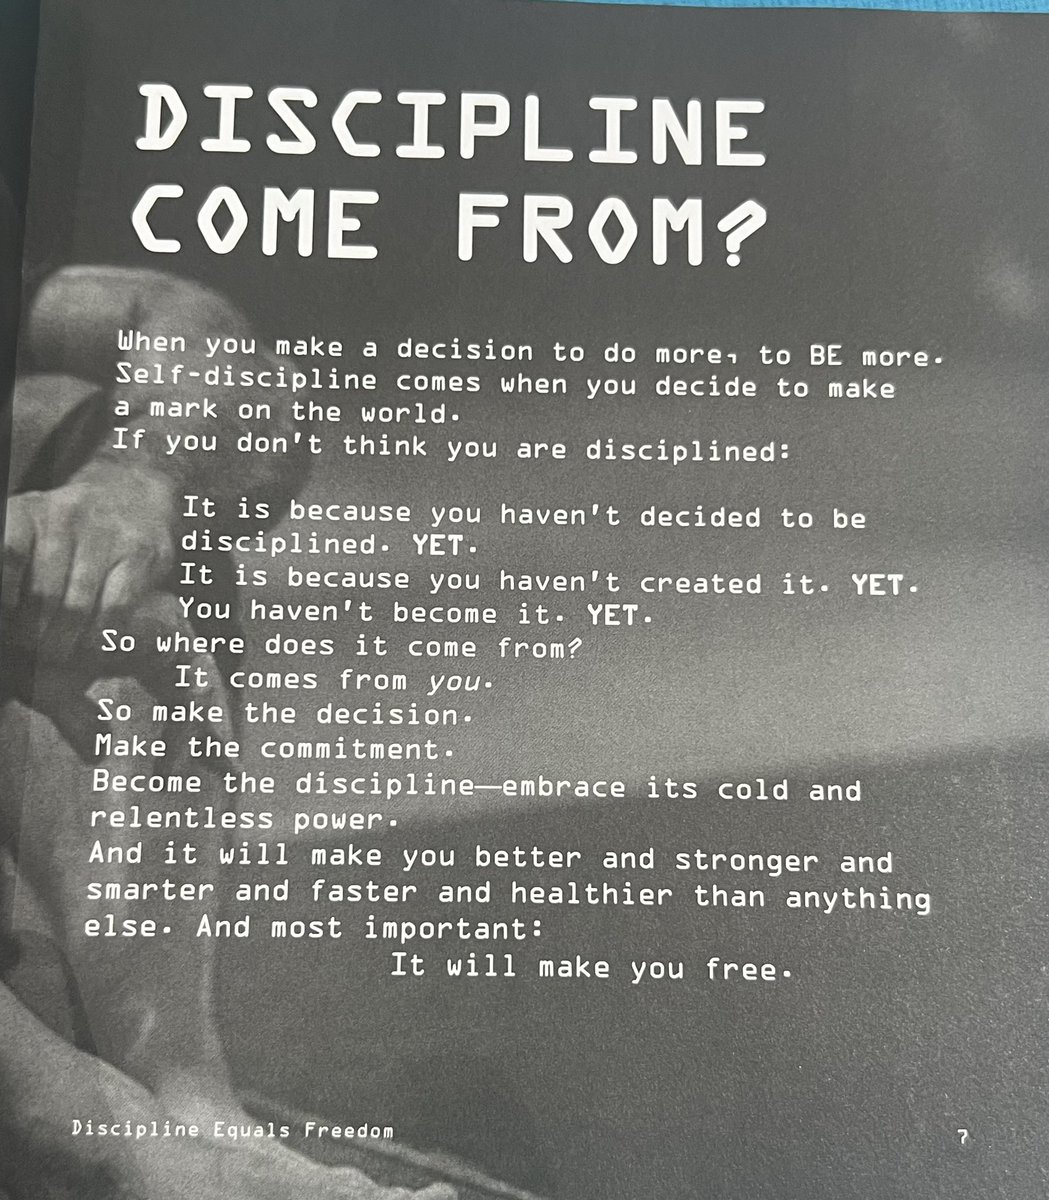 #books #reading #readingtime #discipline #equals #freedom #disciplineequalsfreedom #jockowillink #library #knowledge #wisdom  #answer #internal #force #drill #instructor #selfhelp #external #implies #decision #embrace #cold #relentless #power #better #stronger #smarter #healthier